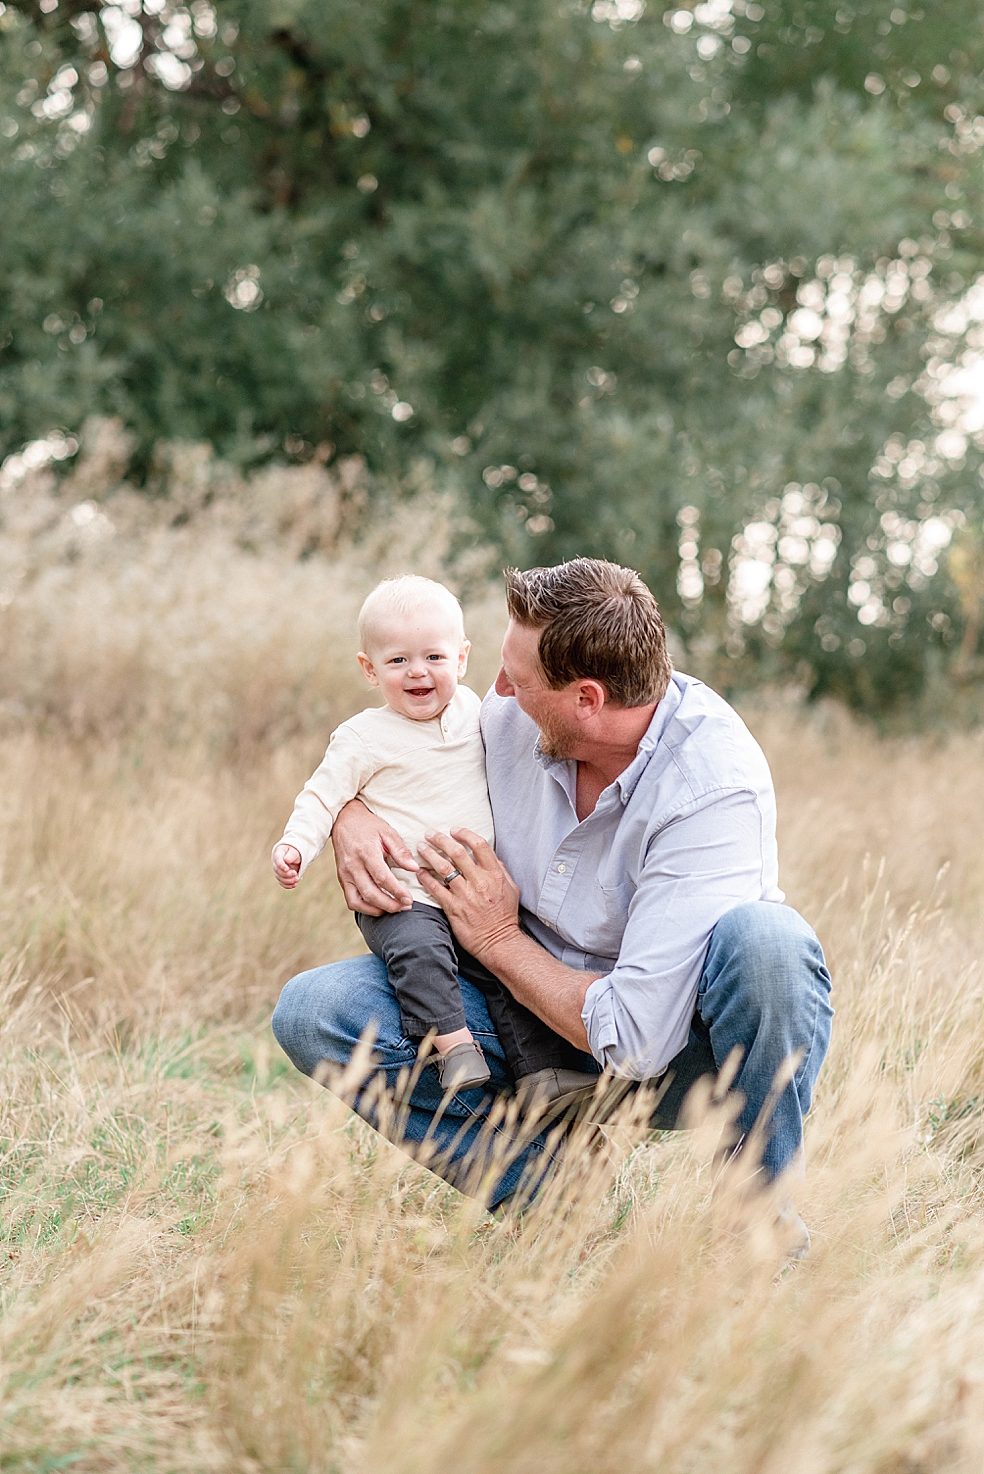 Dad laughing and playing with his toddler | Photo by Madison Alabama Baby Photographer Jessica Lee